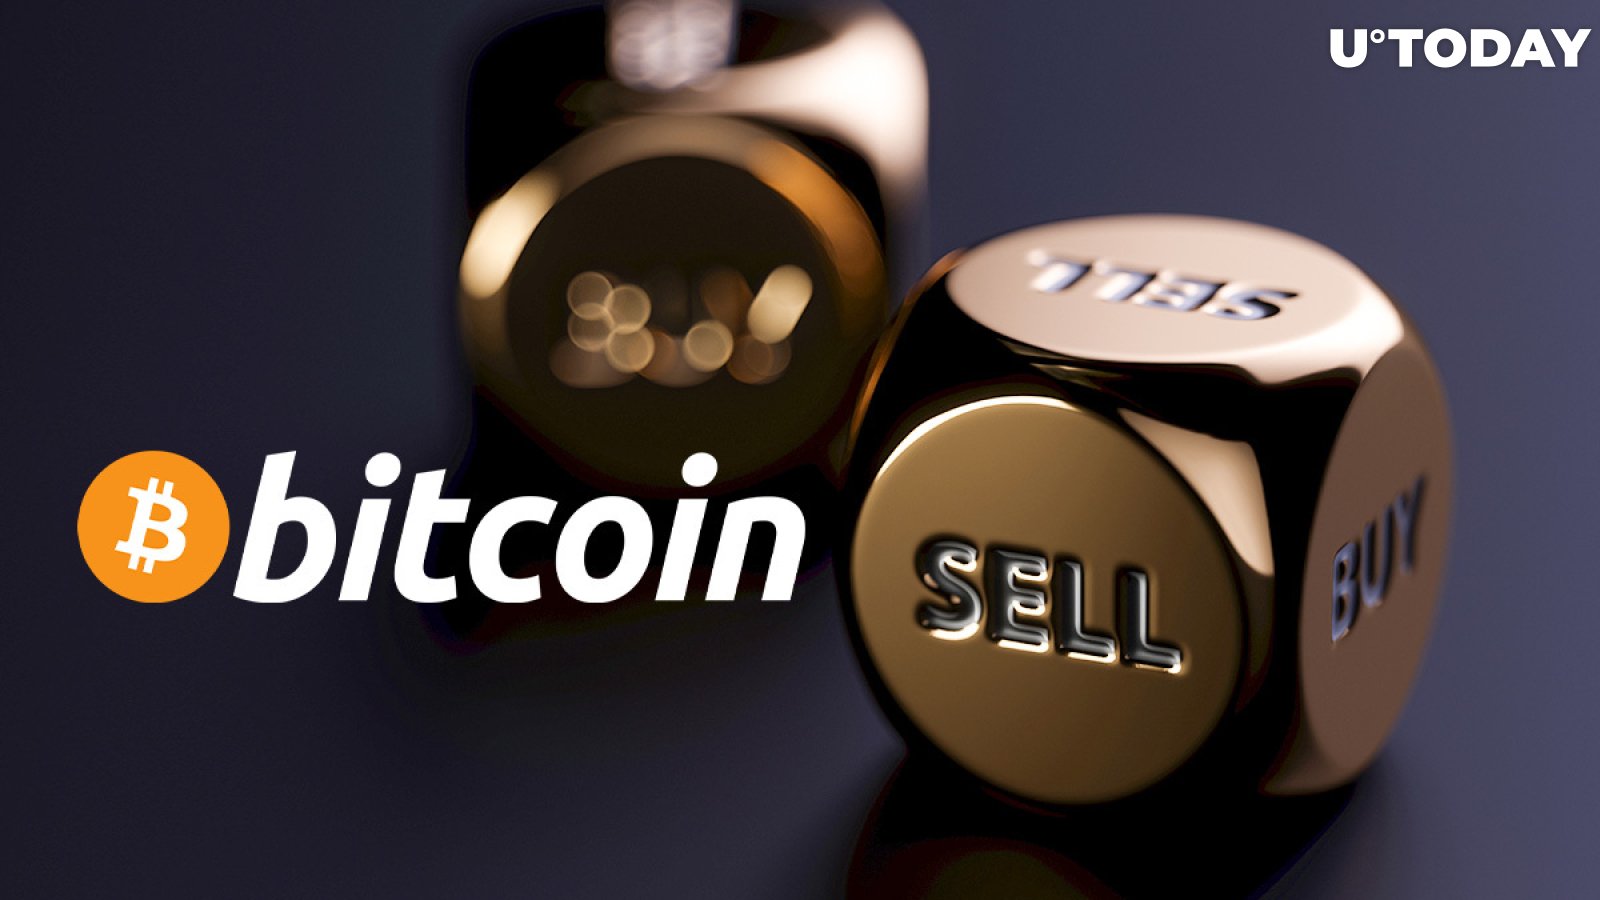 Bitcoin (BTC) Veteran Reveals Why He Almost Sold His Bitcoin (BTC) in 2012